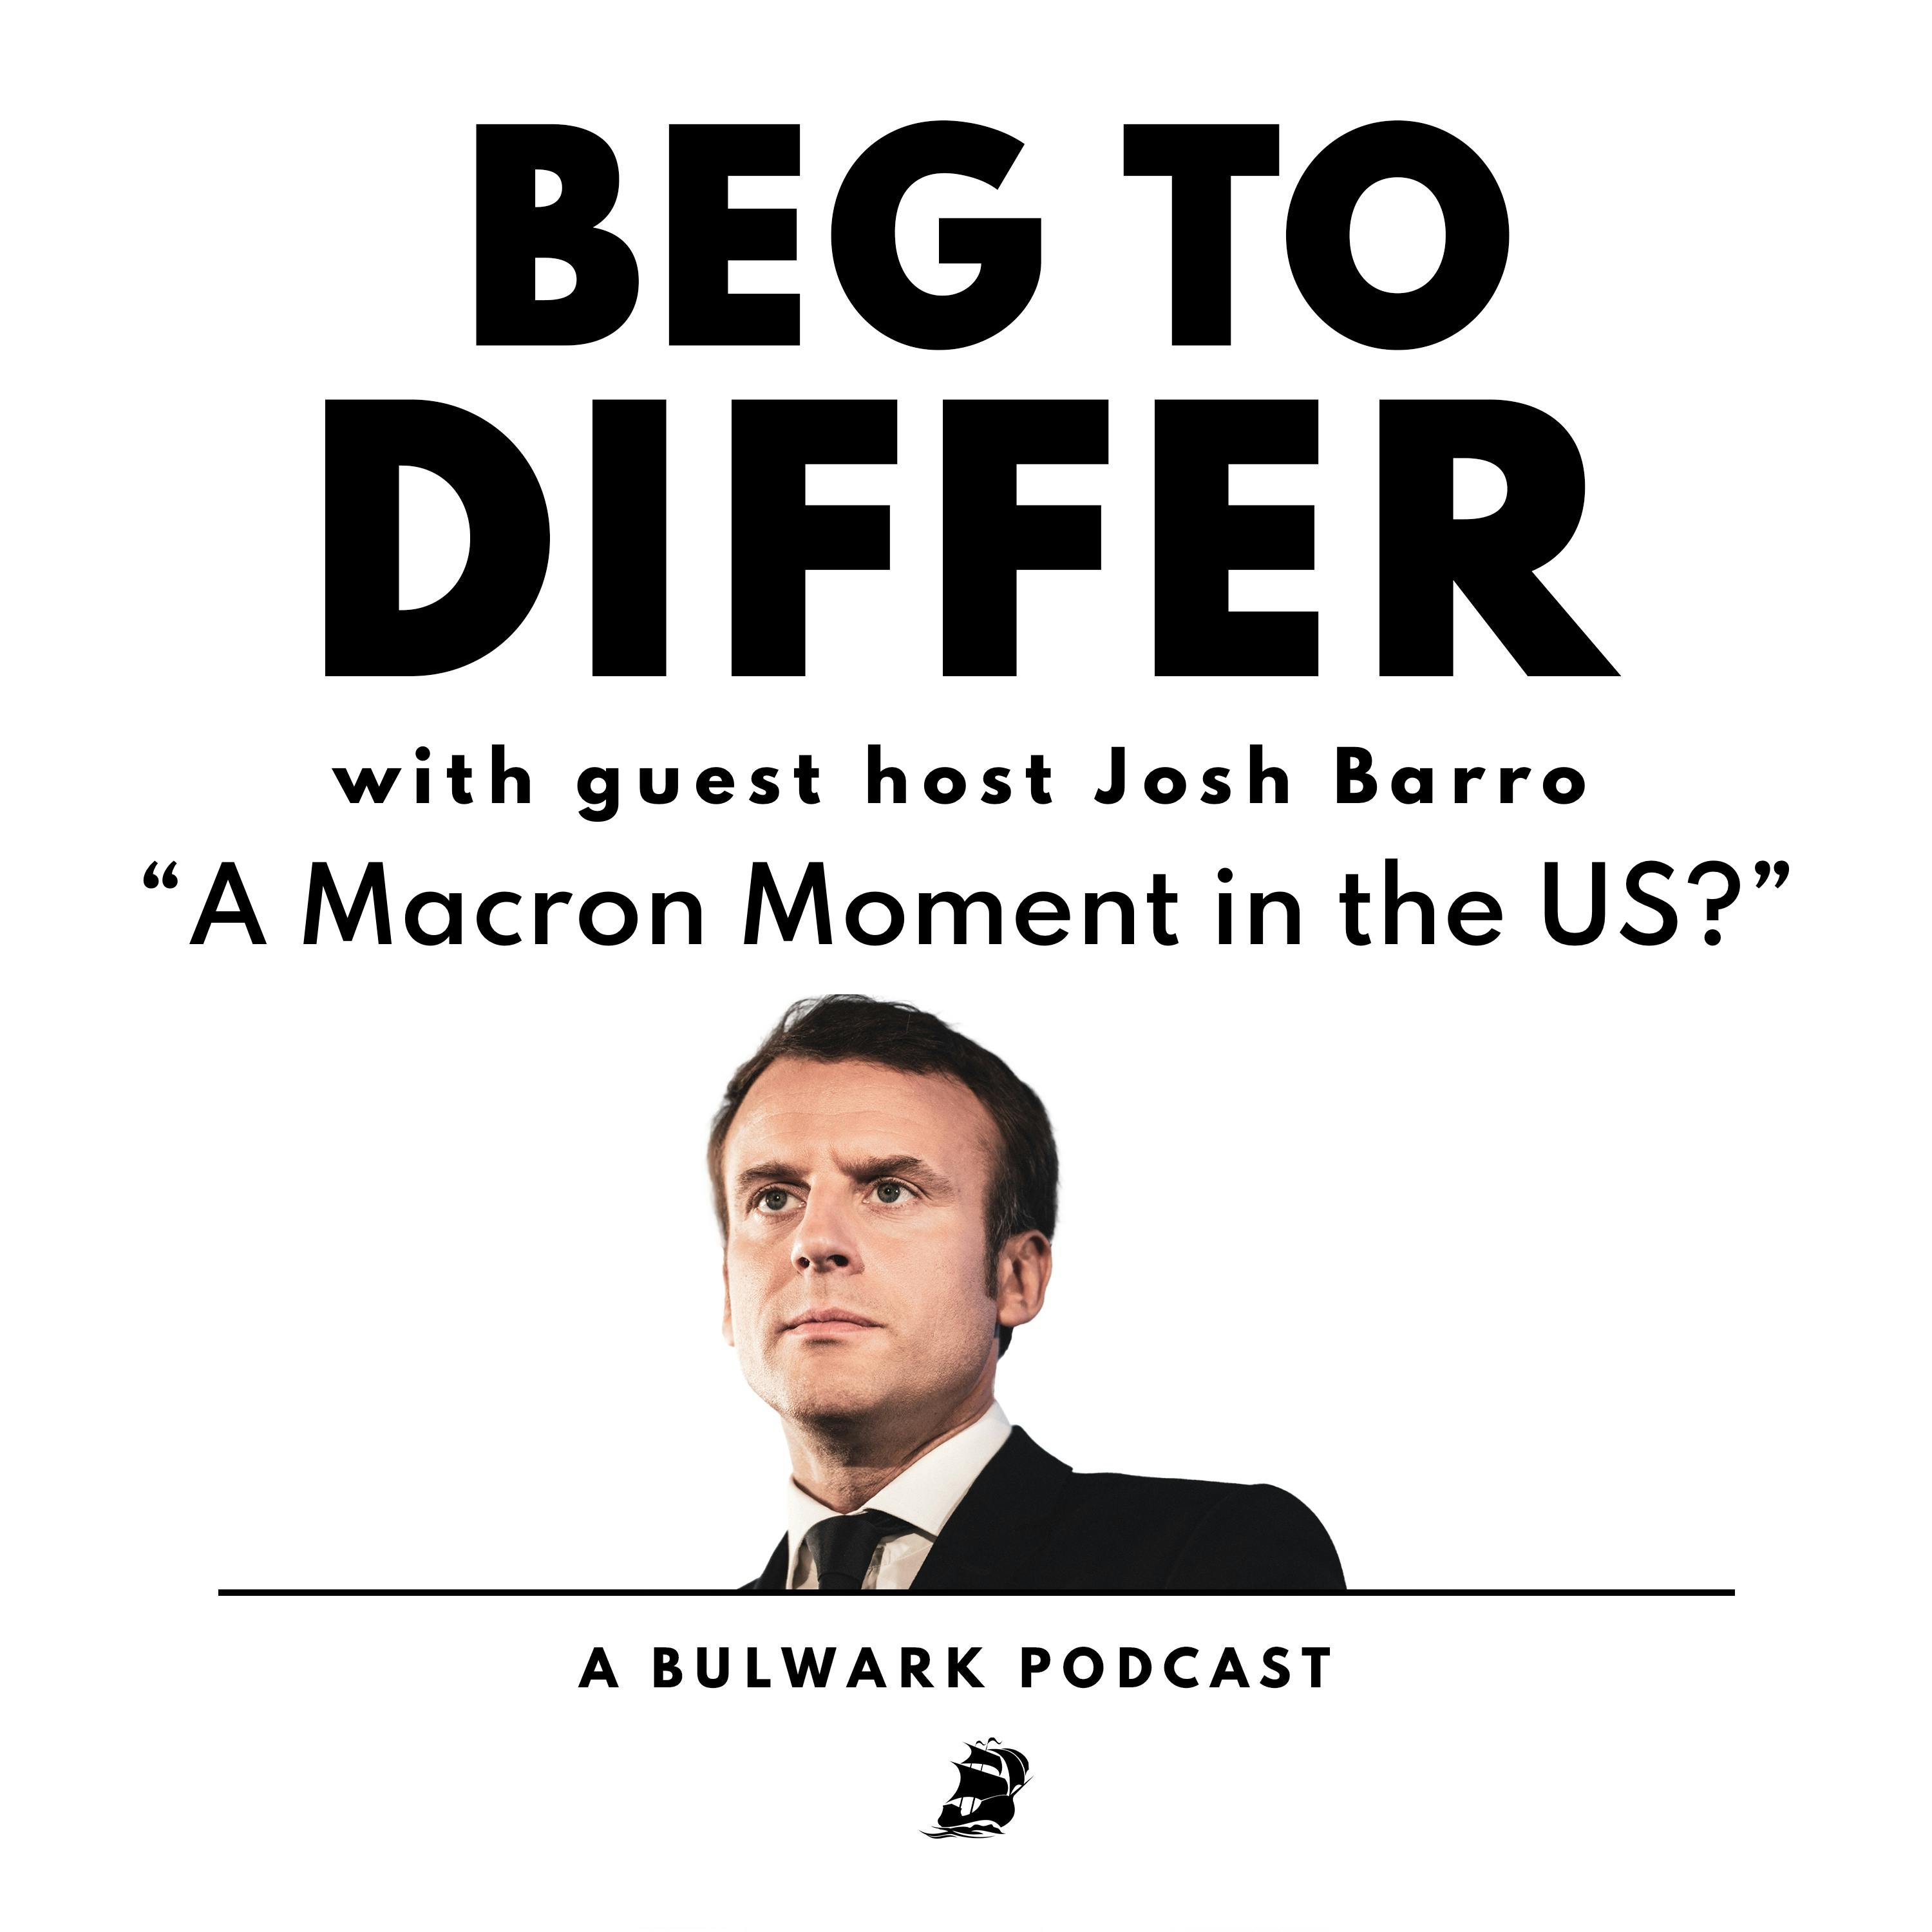 A Macron Moment in the US? (with guest host Josh Barro)